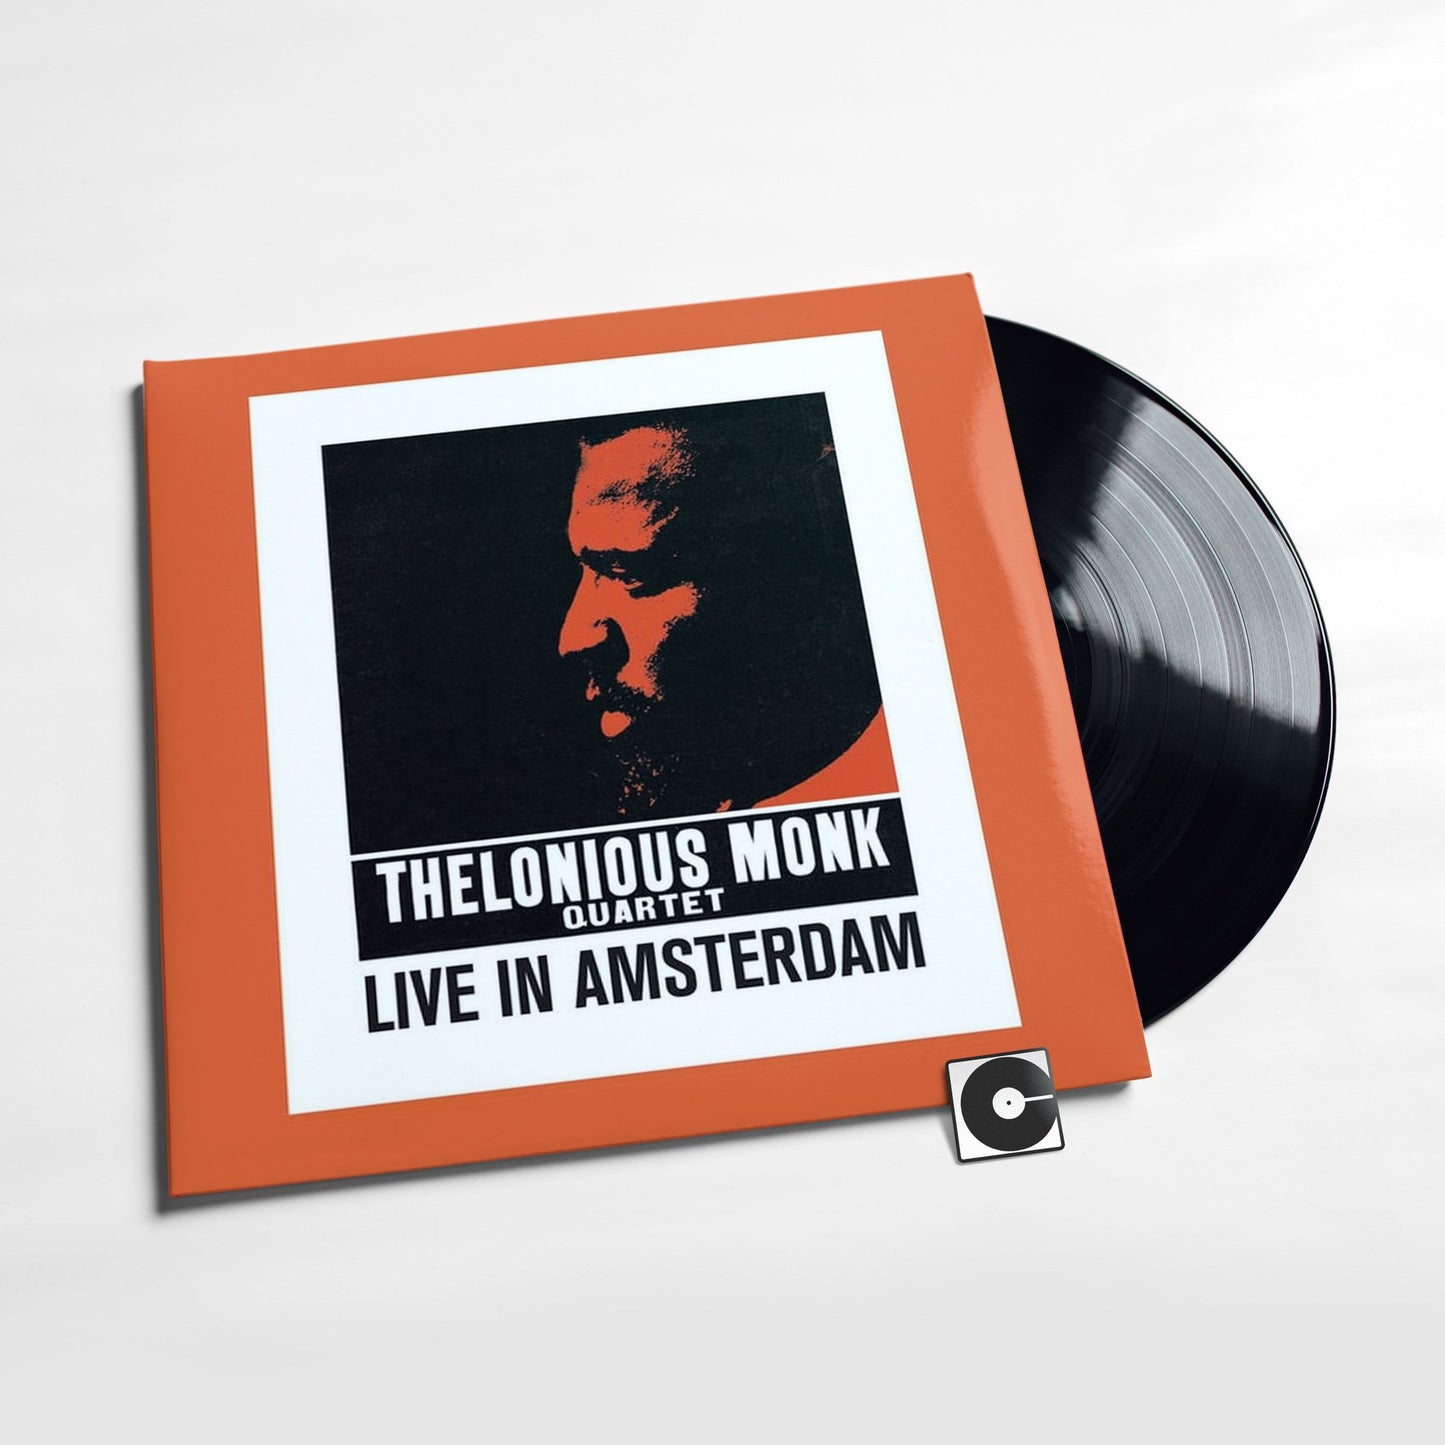 Thelonious Monk - "The Thelonious Monk Quartet Live In Amsterdam"